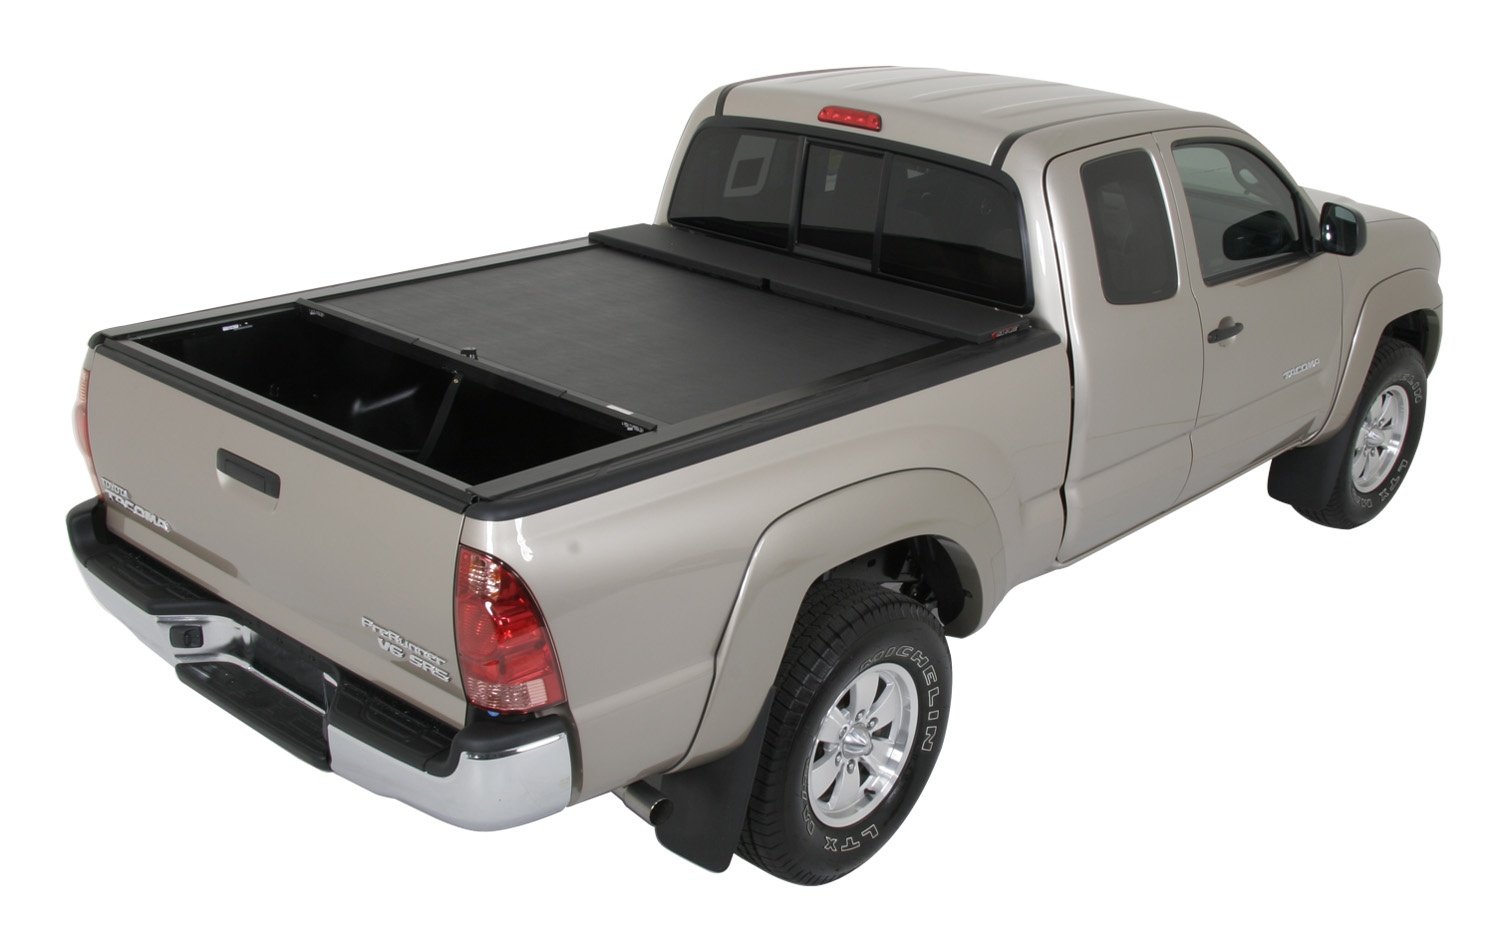 LG502M M-Series Locking Retractable Truck Bed Cover for 2005-2015 Toyota Tacoma Regular, Access/Double Cab [6 ft. Bed]